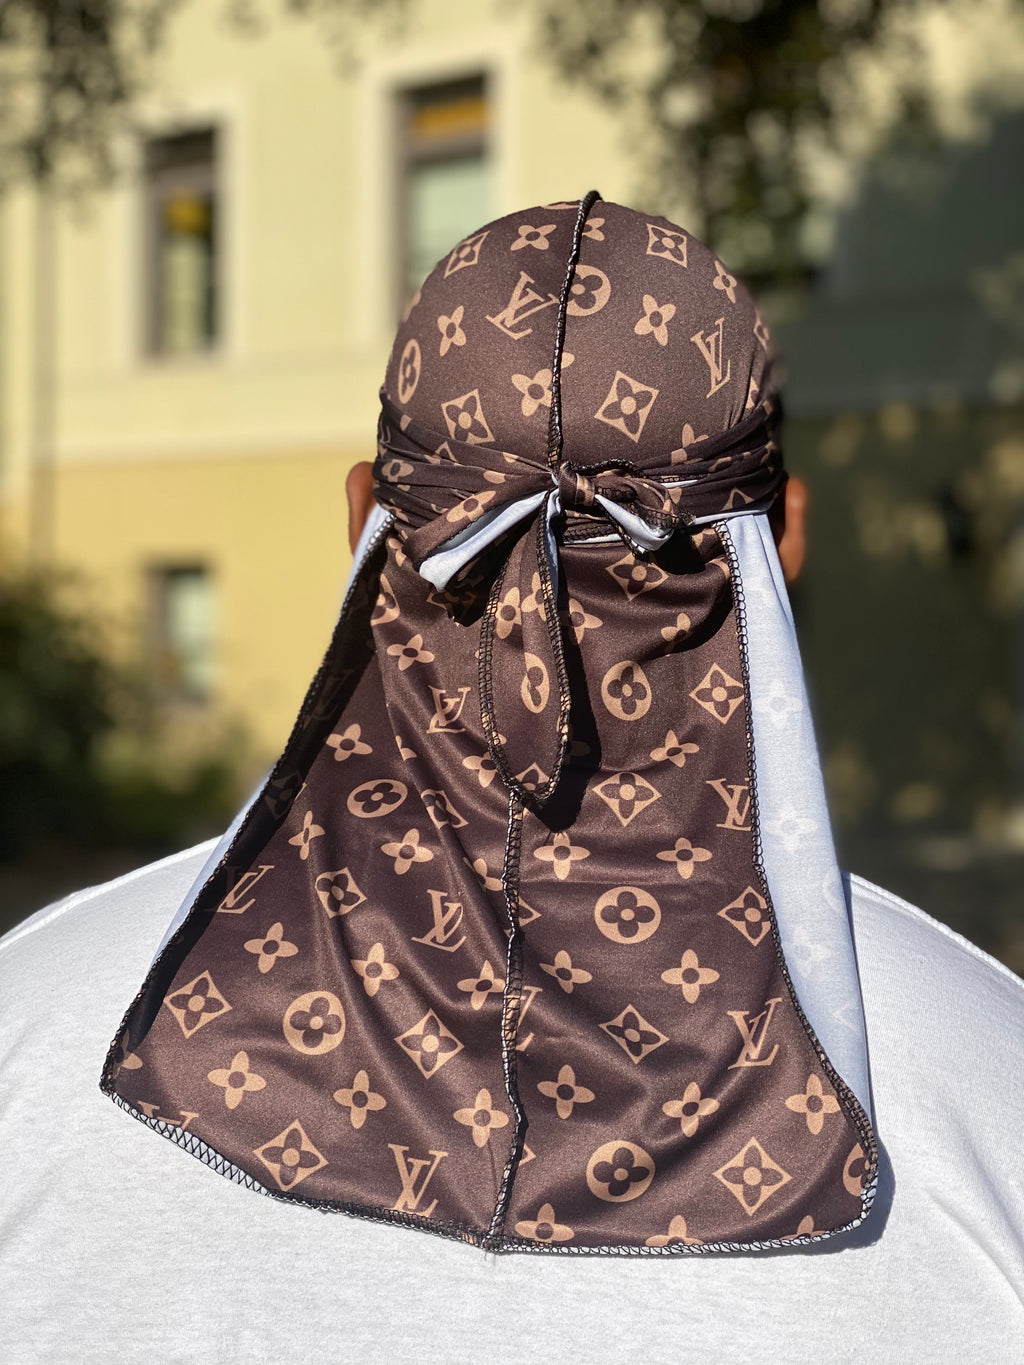 Red And White Lv Durag